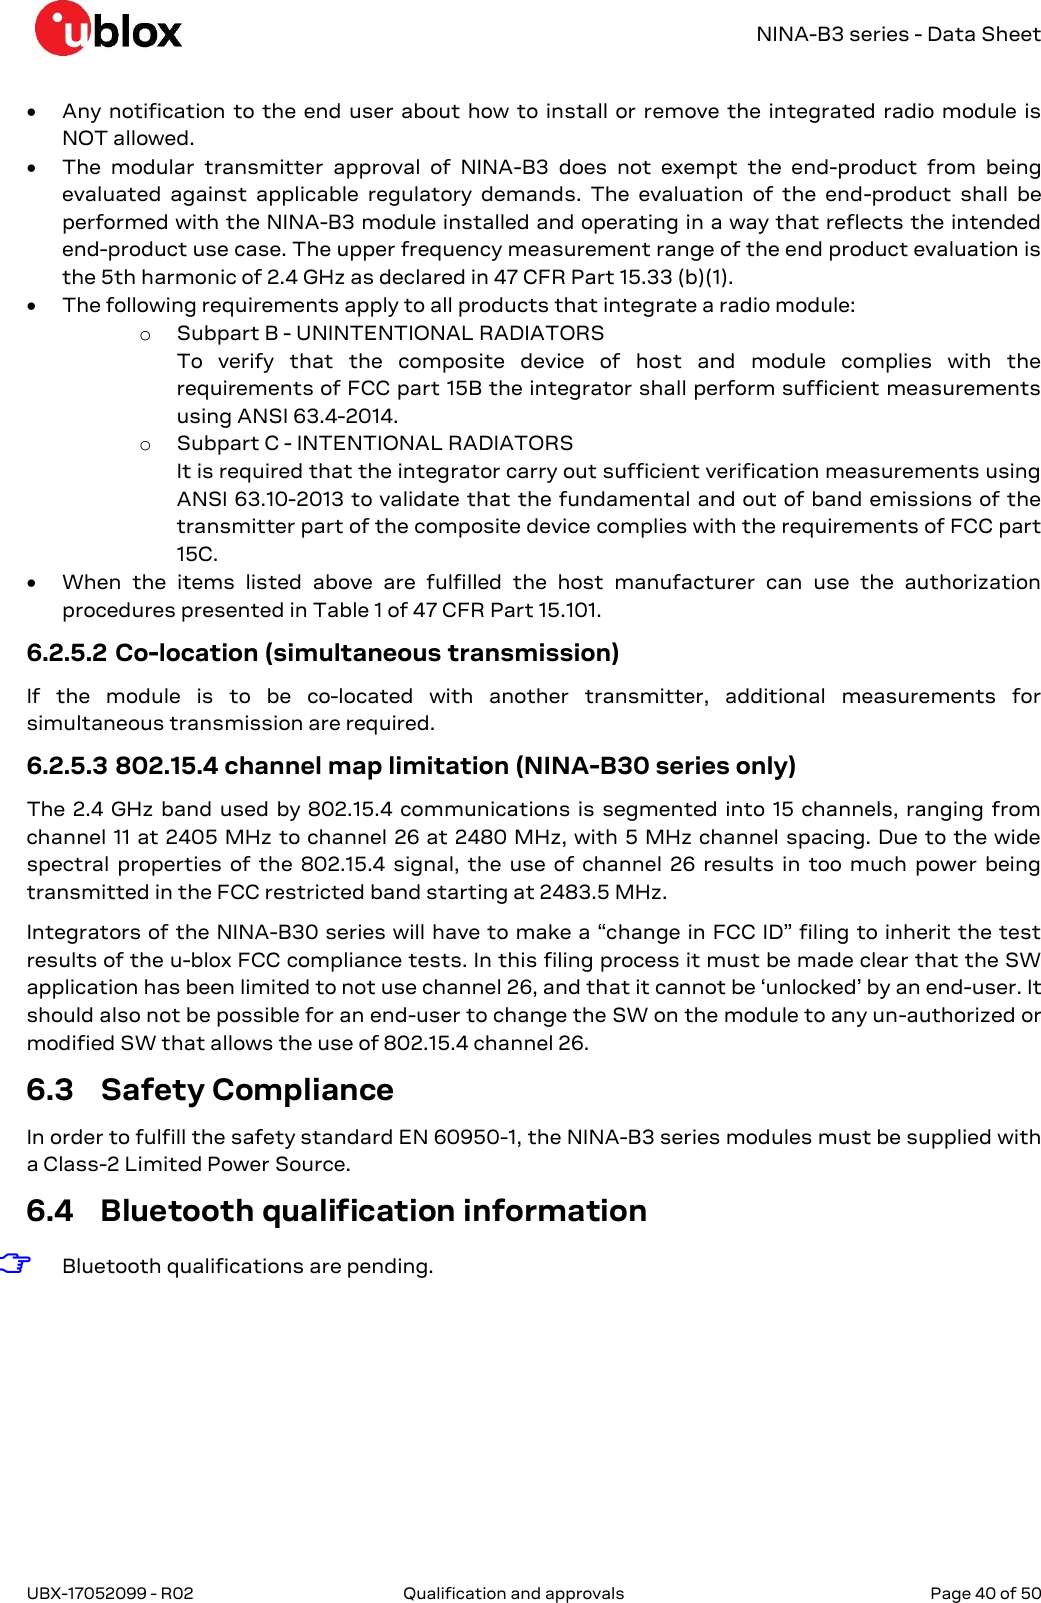   NINA-B3 series - Data Sheet UBX-17052099 - R02  Qualification and approvals   Page 40 of 50       Any notification to the end user about how to install or remove the integrated radio module is NOT allowed.  The  modular  transmitter  approval  of  NINA-B3  does  not  exempt  the  end-product  from  being evaluated  against  applicable  regulatory  demands.  The  evaluation  of  the  end-product  shall  be performed with the NINA-B3 module installed and operating in a way that reflects the intended end-product use case. The upper frequency measurement range of the end product evaluation is the 5th harmonic of 2.4 GHz as declared in 47 CFR Part 15.33 (b)(1).   The following requirements apply to all products that integrate a radio module: o Subpart B - UNINTENTIONAL RADIATORS To  verify  that  the  composite  device  of  host  and  module  complies  with  the requirements of FCC part 15B the integrator shall perform sufficient measurements using ANSI 63.4-2014. o Subpart C - INTENTIONAL RADIATORS It is required that the integrator carry out sufficient verification measurements using ANSI 63.10-2013 to validate that the fundamental and out of band emissions of the transmitter part of the composite device complies with the requirements of FCC part 15C.  When  the  items  listed  above  are  fulfilled  the  host  manufacturer  can  use  the  authorization procedures presented in Table 1 of 47 CFR Part 15.101. 6.2.5.2 Co-location (simultaneous transmission) If  the  module  is  to  be  co-located  with  another  transmitter,  additional  measurements  for simultaneous transmission are required. 6.2.5.3 802.15.4 channel map limitation (NINA-B30 series only) The 2.4 GHz band used by 802.15.4 communications is segmented into 15 channels, ranging from channel 11 at 2405 MHz to channel 26 at 2480 MHz, with 5 MHz channel spacing. Due to the wide spectral properties  of the  802.15.4 signal, the use  of channel  26 results  in too much  power  being transmitted in the FCC restricted band starting at 2483.5 MHz. Integrators of the NINA-B30 series will have to make a “change in FCC ID” filing to inherit the test results of the u-blox FCC compliance tests. In this filing process it must be made clear that the SW application has been limited to not use channel 26, and that it cannot be ‘unlocked’ by an end-user. It should also not be possible for an end-user to change the SW on the module to any un-authorized or modified SW that allows the use of 802.15.4 channel 26. 6.3 Safety Compliance In order to fulfill the safety standard EN 60950-1, the NINA-B3 series modules must be supplied with a Class-2 Limited Power Source. 6.4 Bluetooth qualification information ☞ Bluetooth qualifications are pending.   